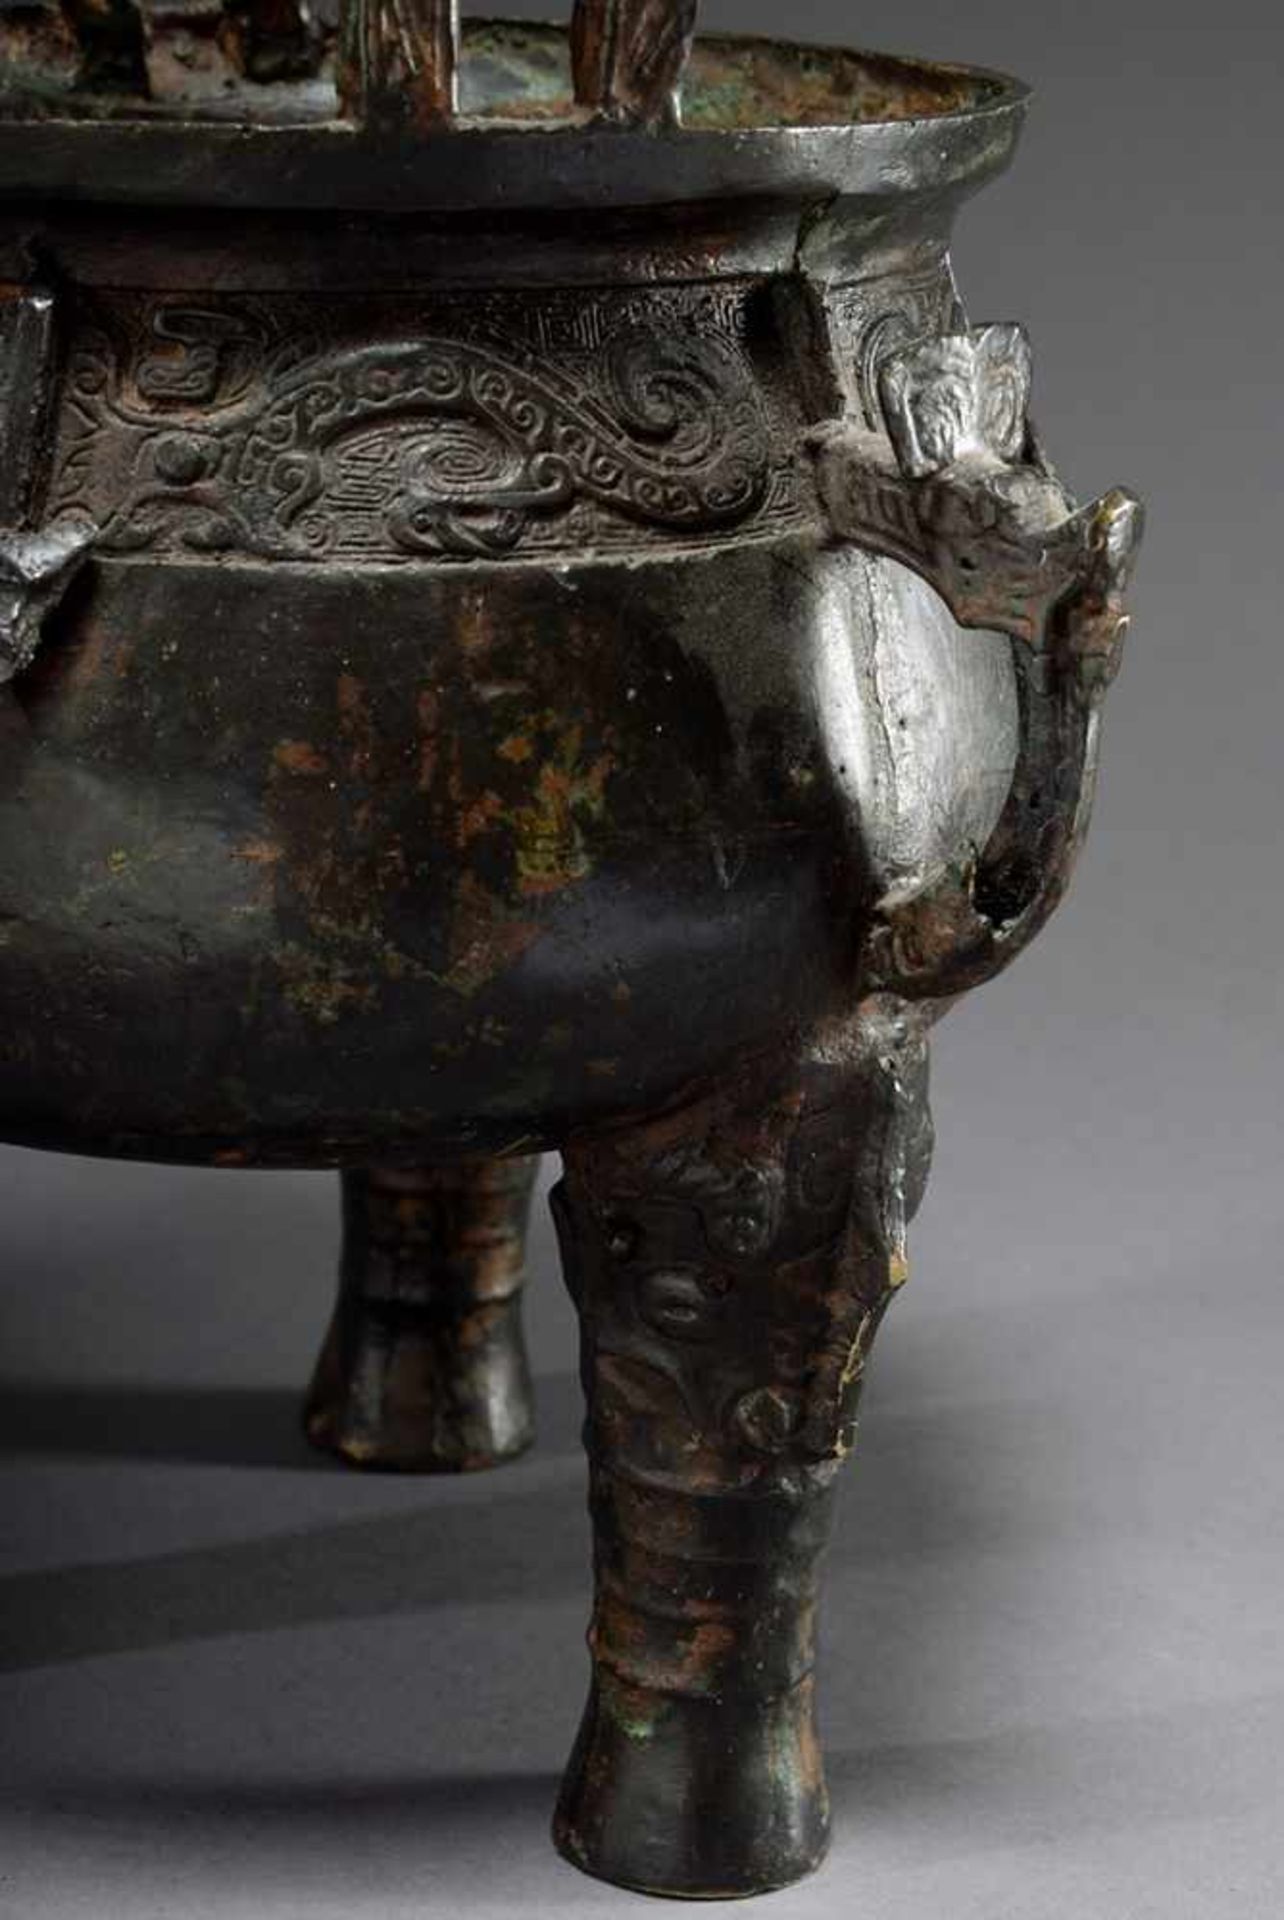 Bronze ritual vessel of the type "Ding" with archaic ornamental frieze on 3 legs, China 18th/19th - Bild 3 aus 10